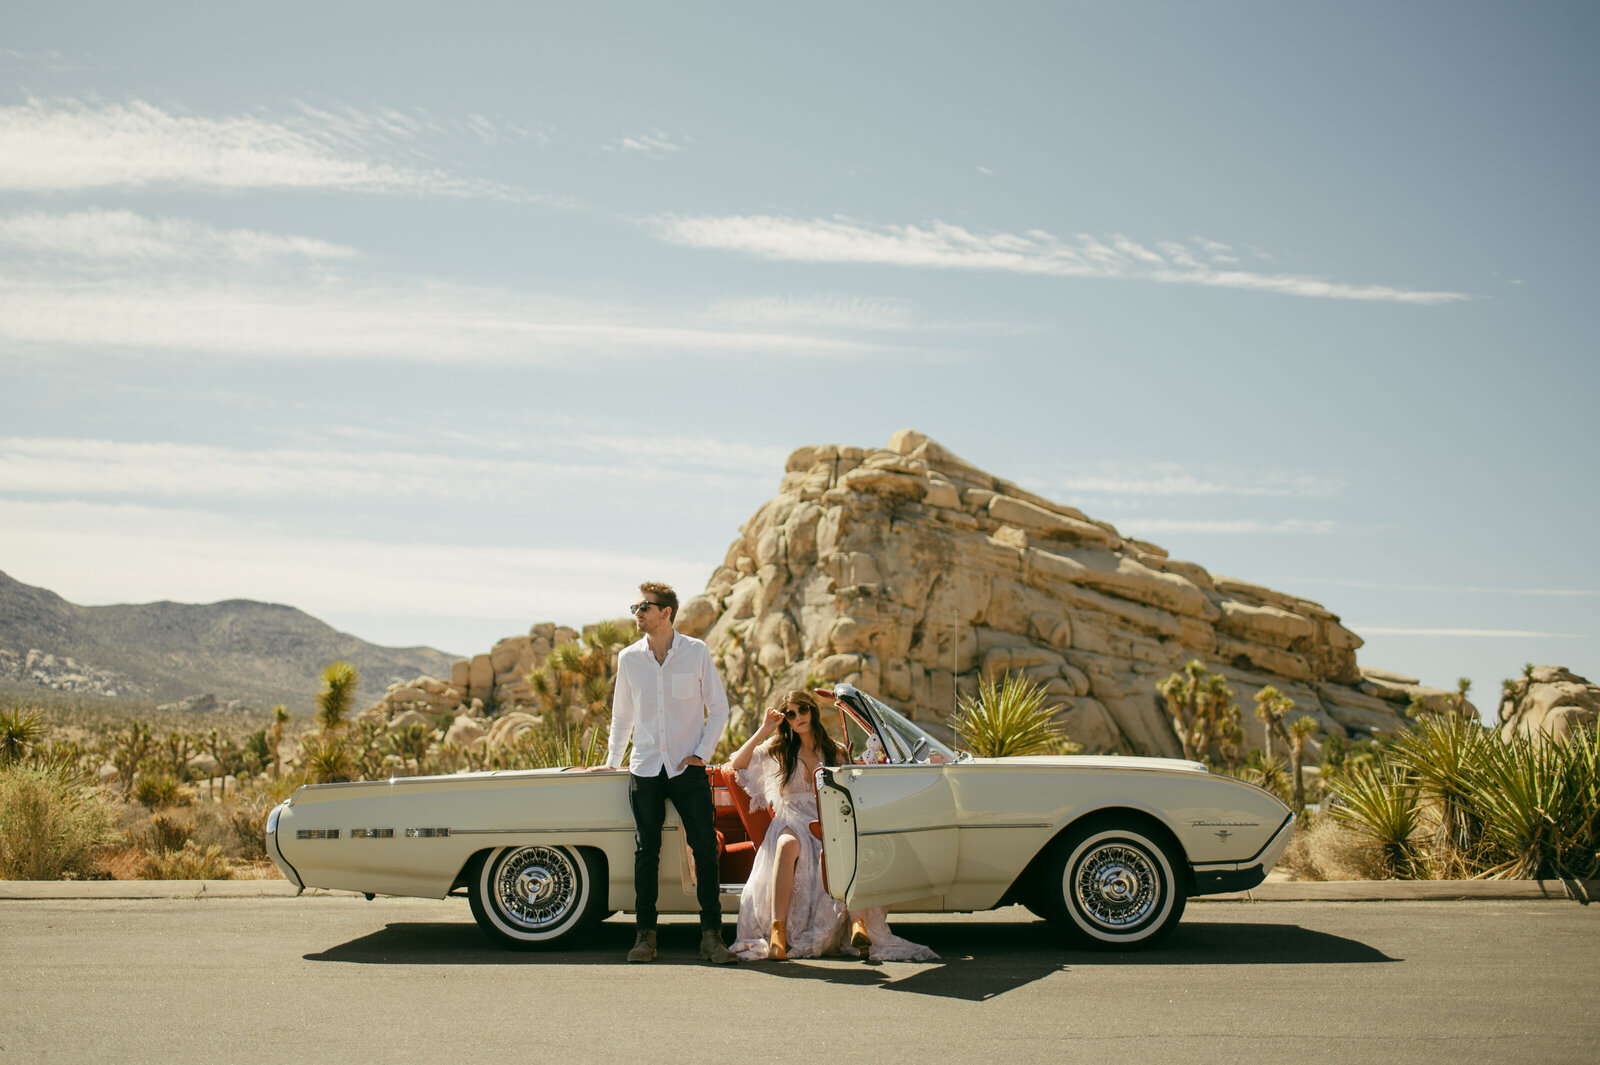 A wedding couple in a retro photoshoot with a classic car in Joshua Tree National Park